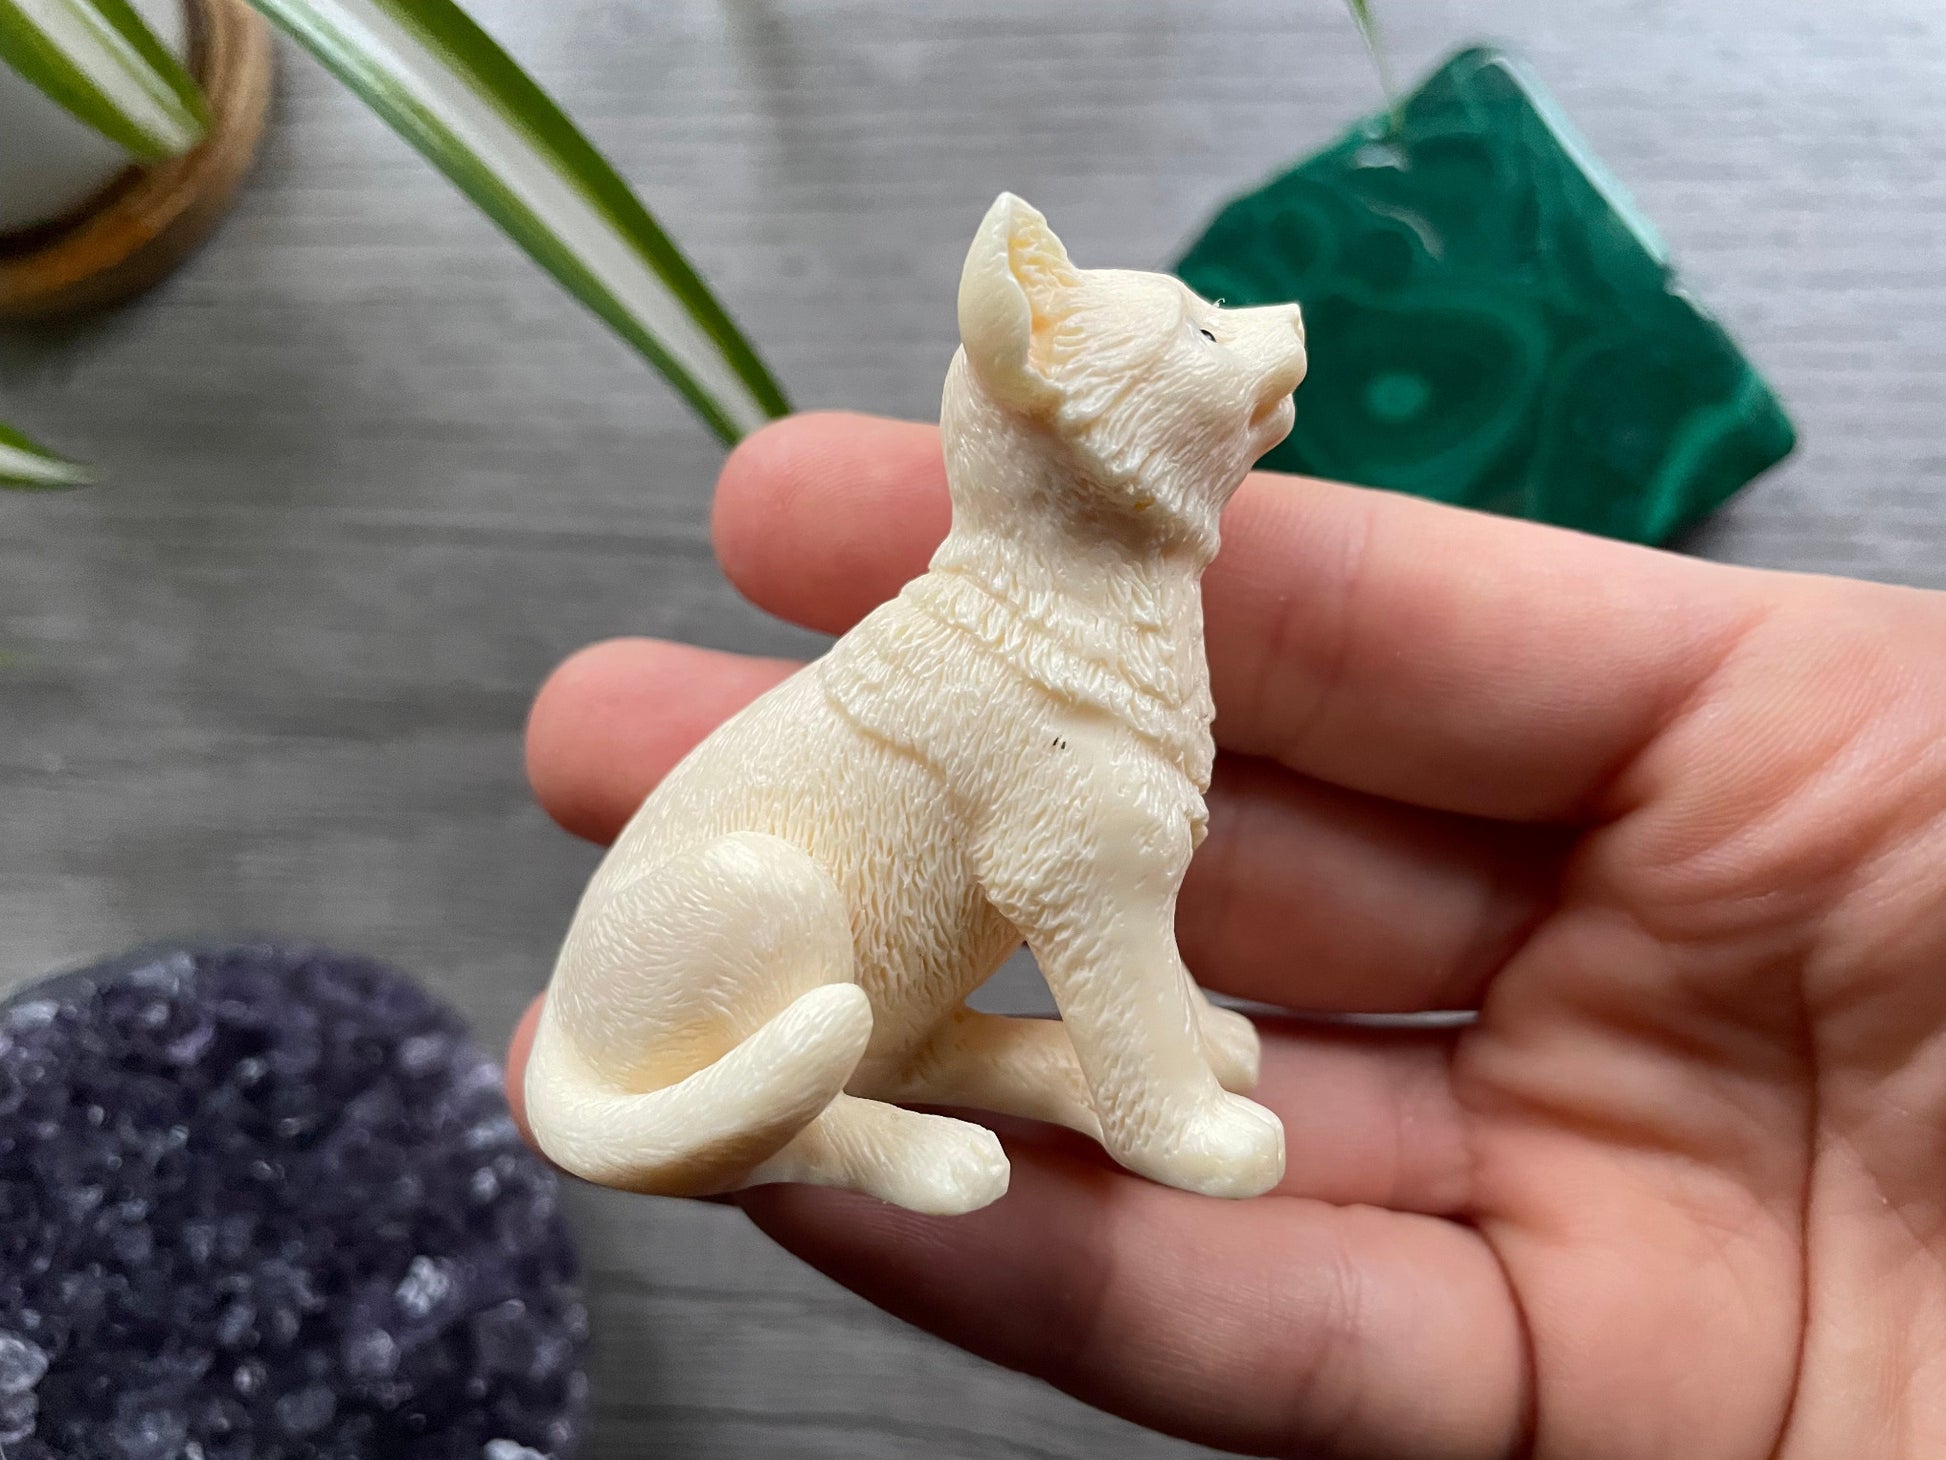 Pictured is a dog carved out of tagua nut.